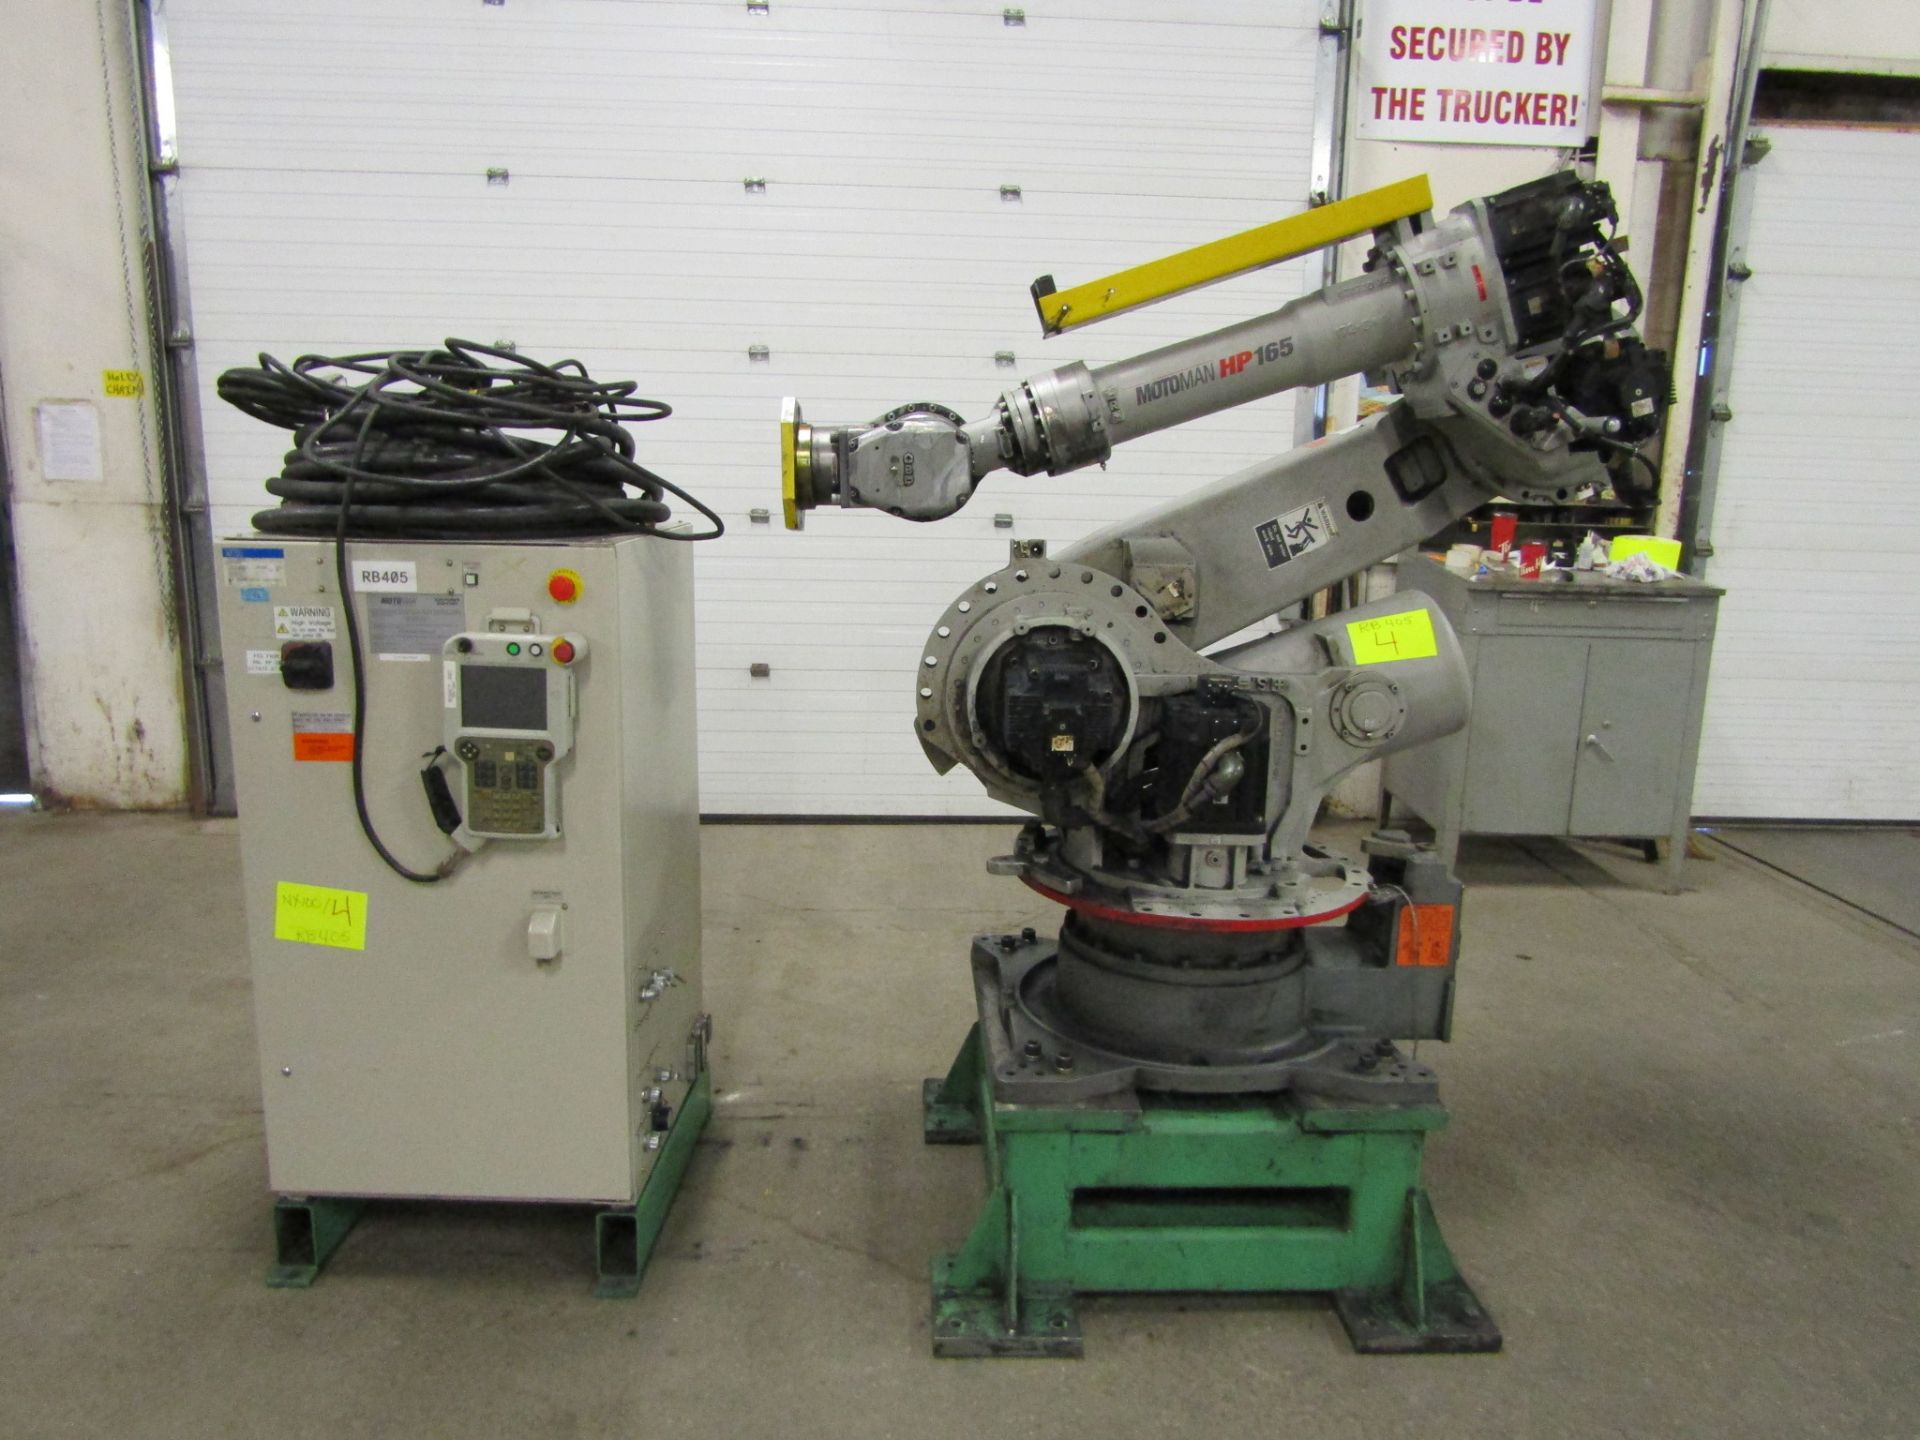 2008 Motoman HP165 Robot 165kg Capacity with Controller COMPLETE with Teach Pendant, Cables, LOW